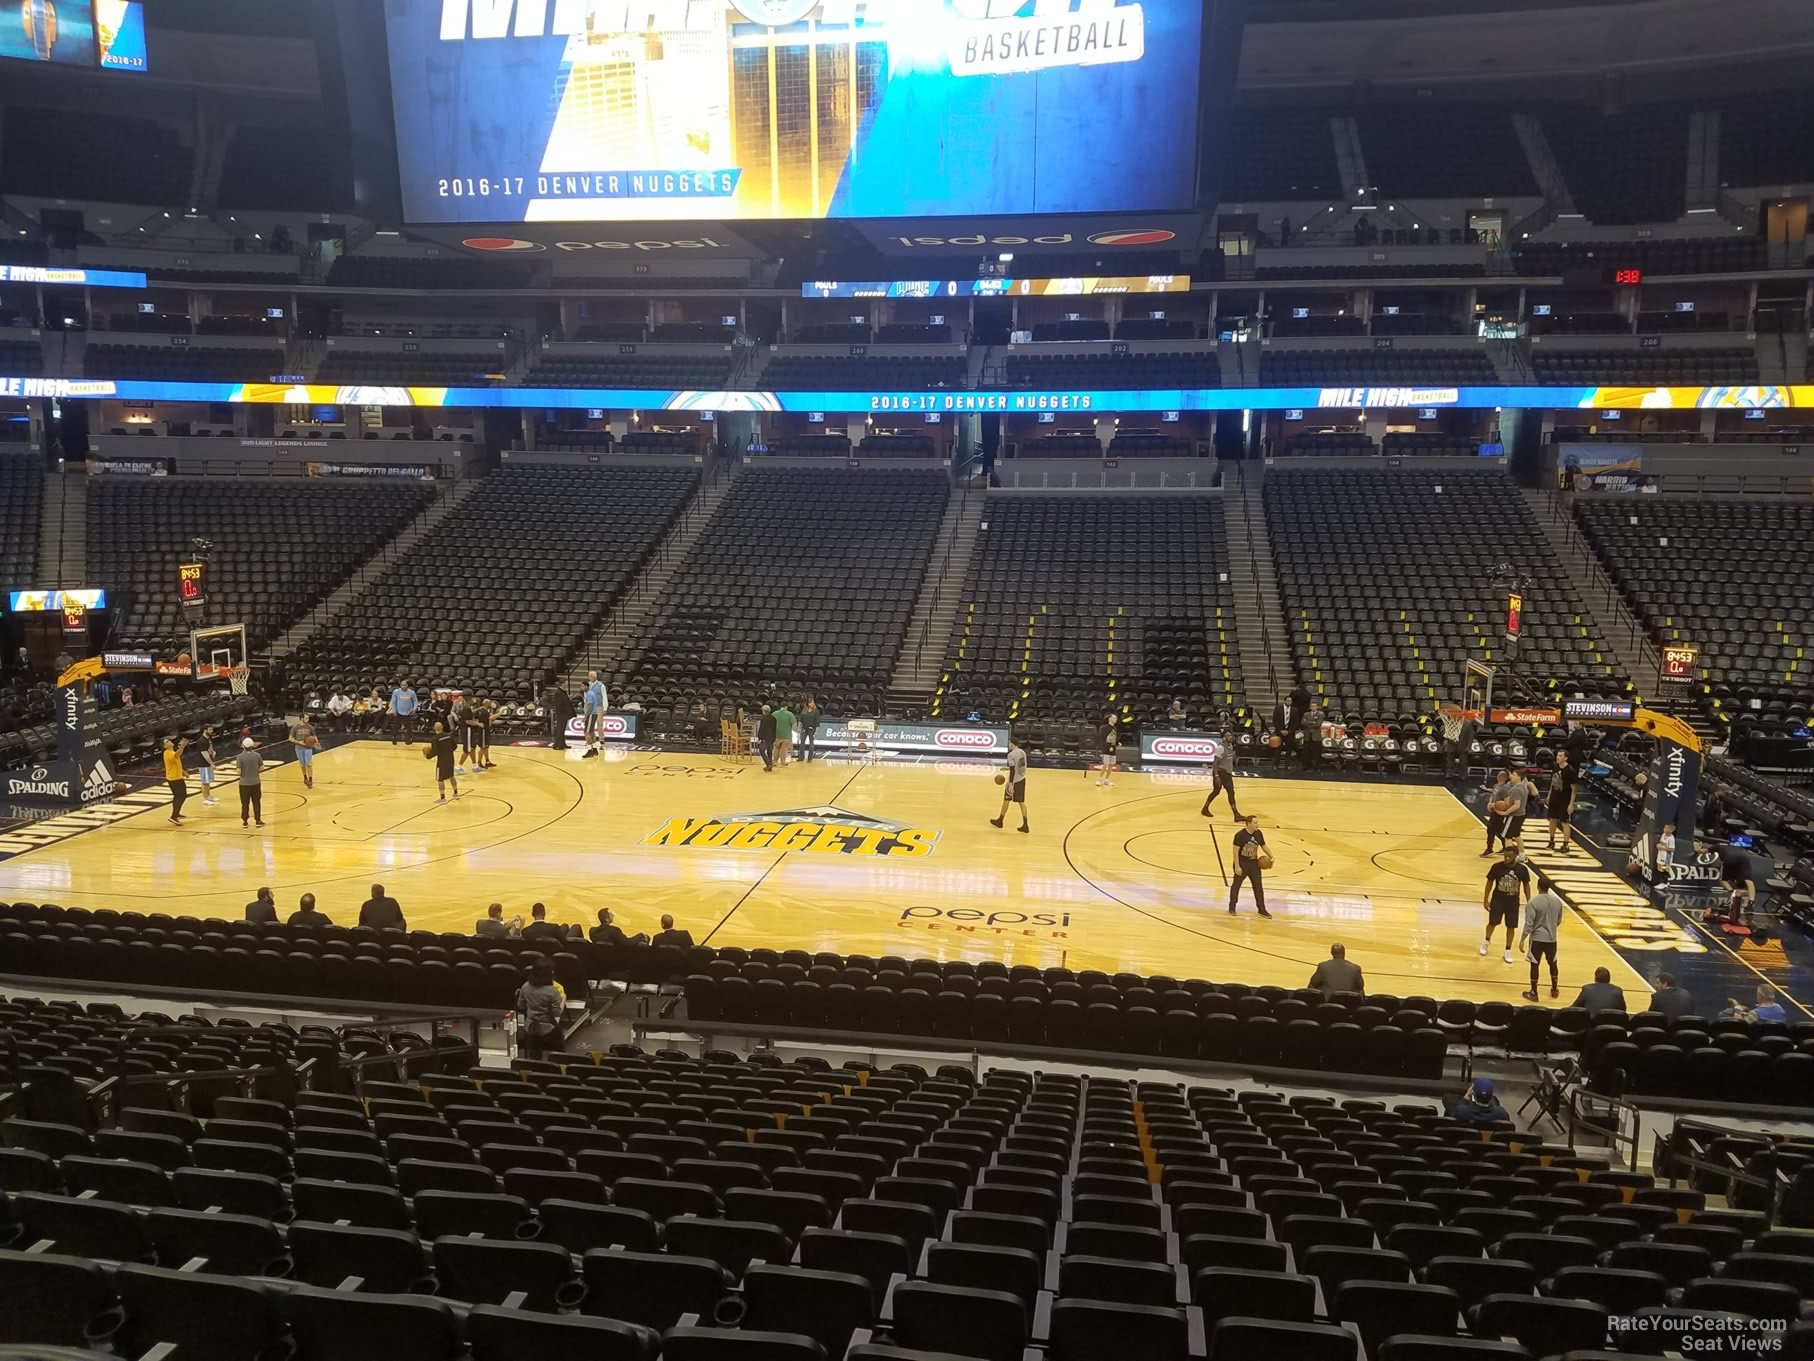 section 124, row 19 seat view  for basketball - ball arena